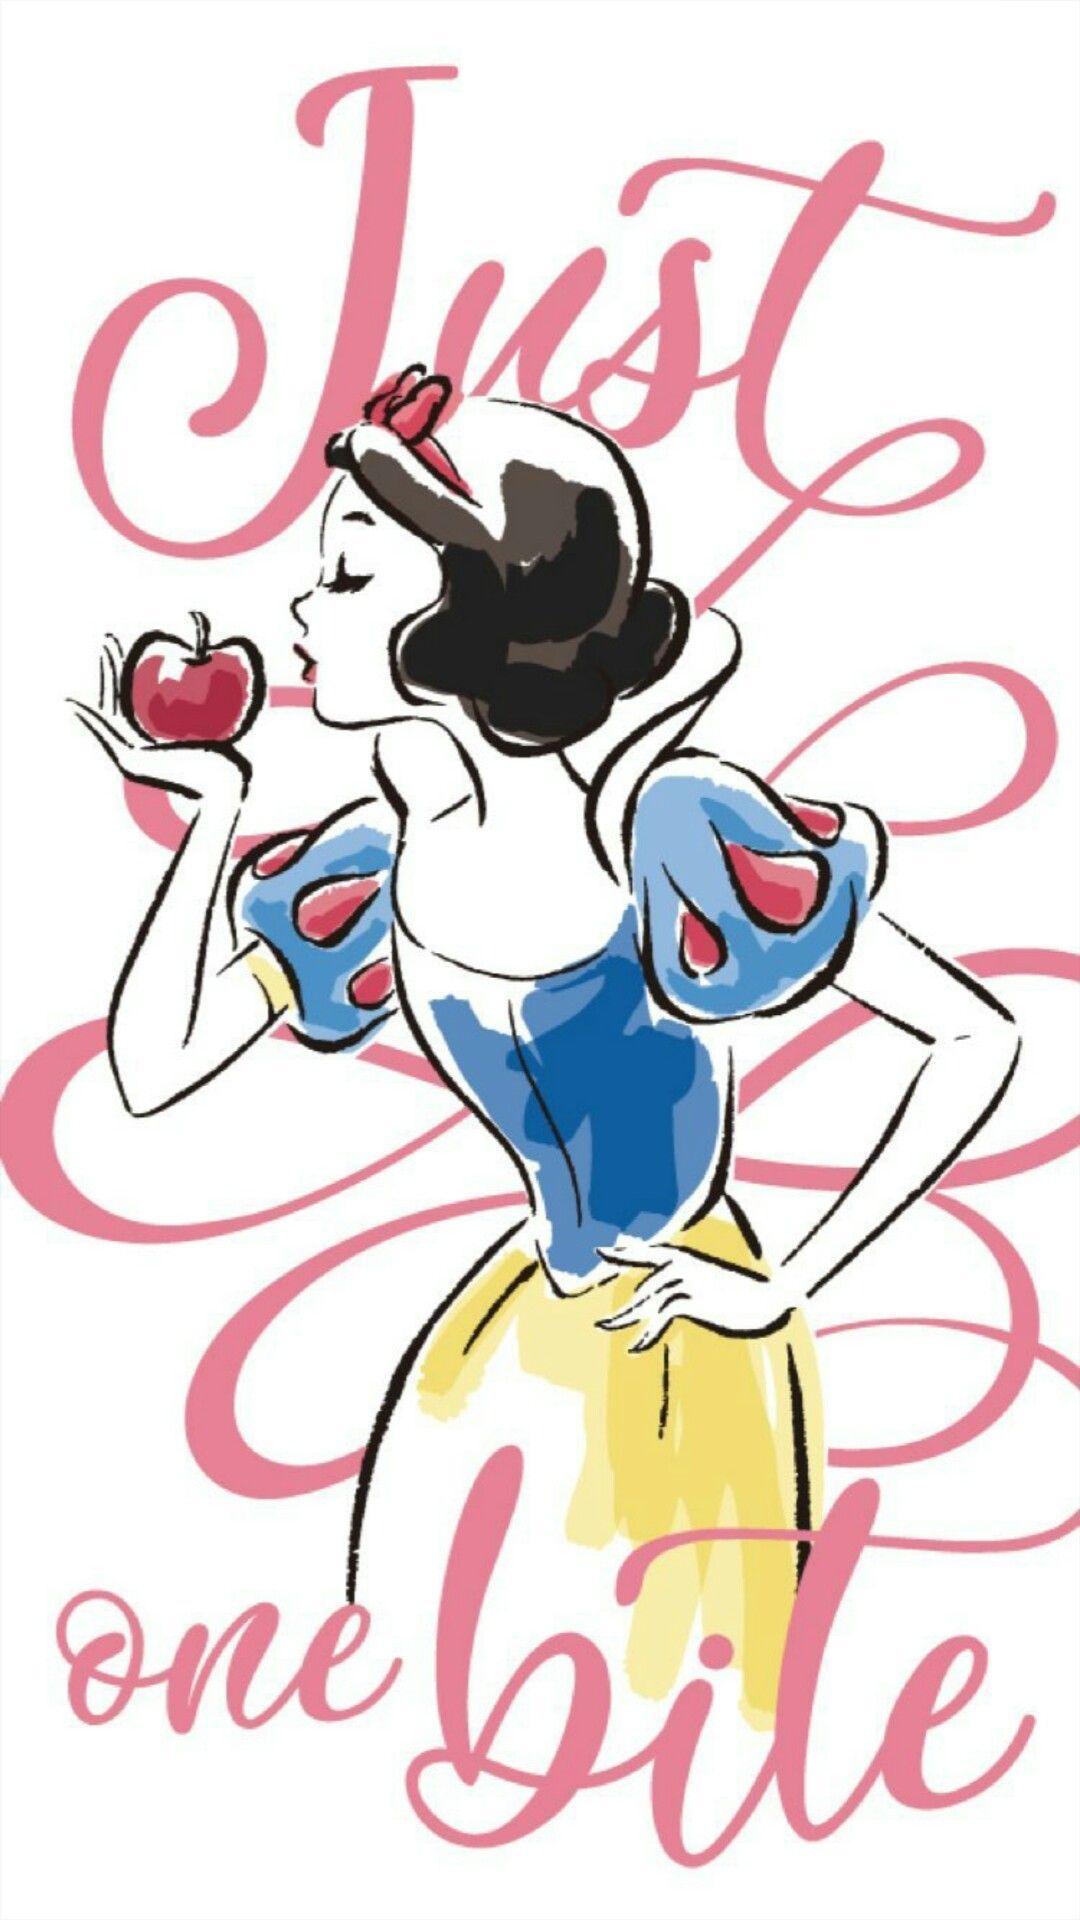 Snow White Aesthetic Soft Wallpaper (with tittle) | Snow white wallpaper,  Disney wallpaper, Disney princess snow white